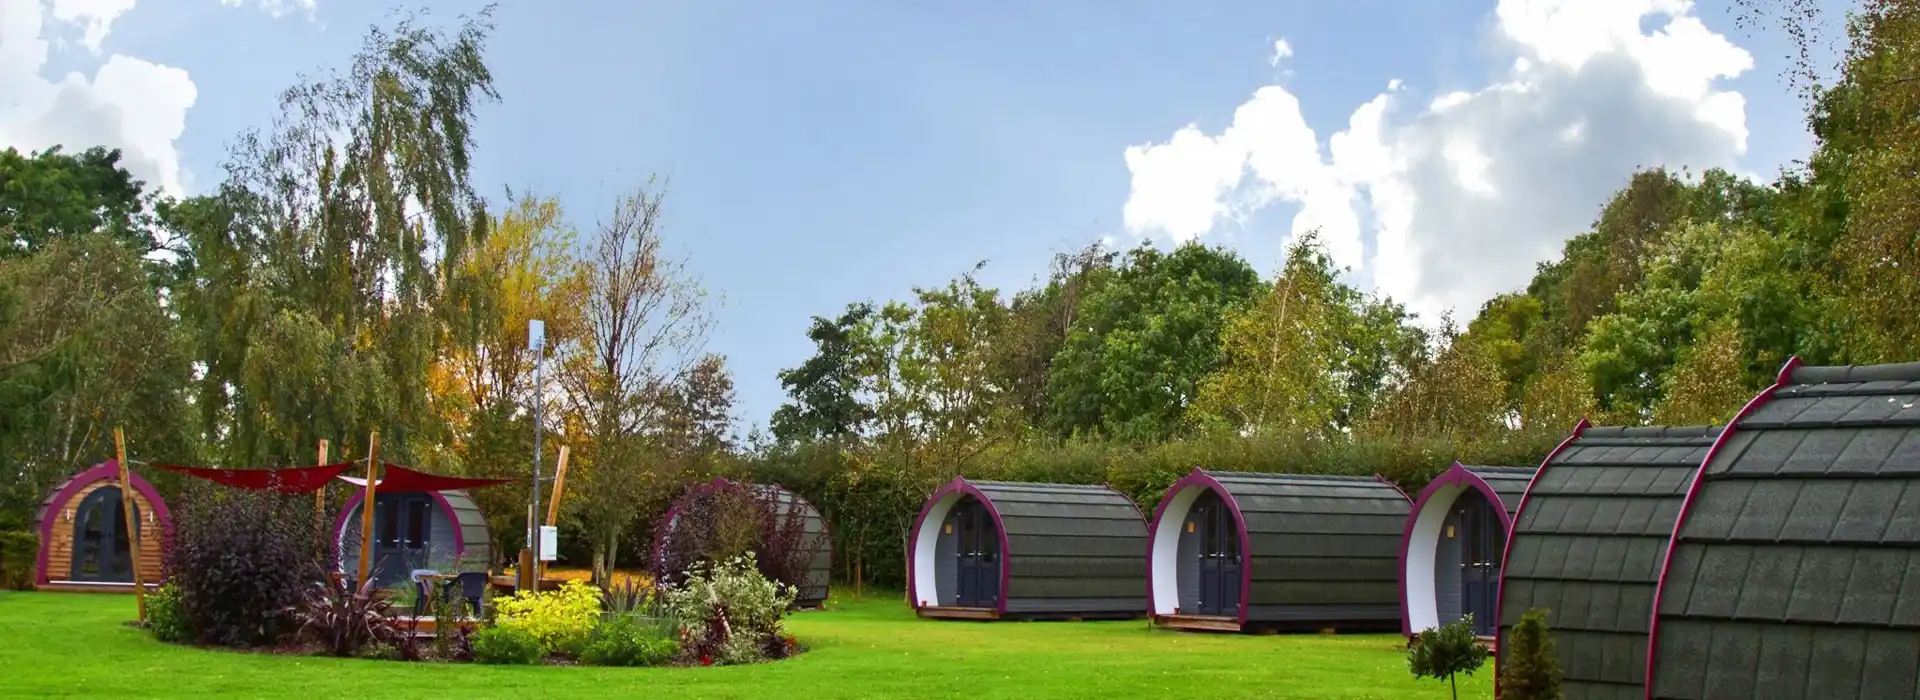 Camping pods in York